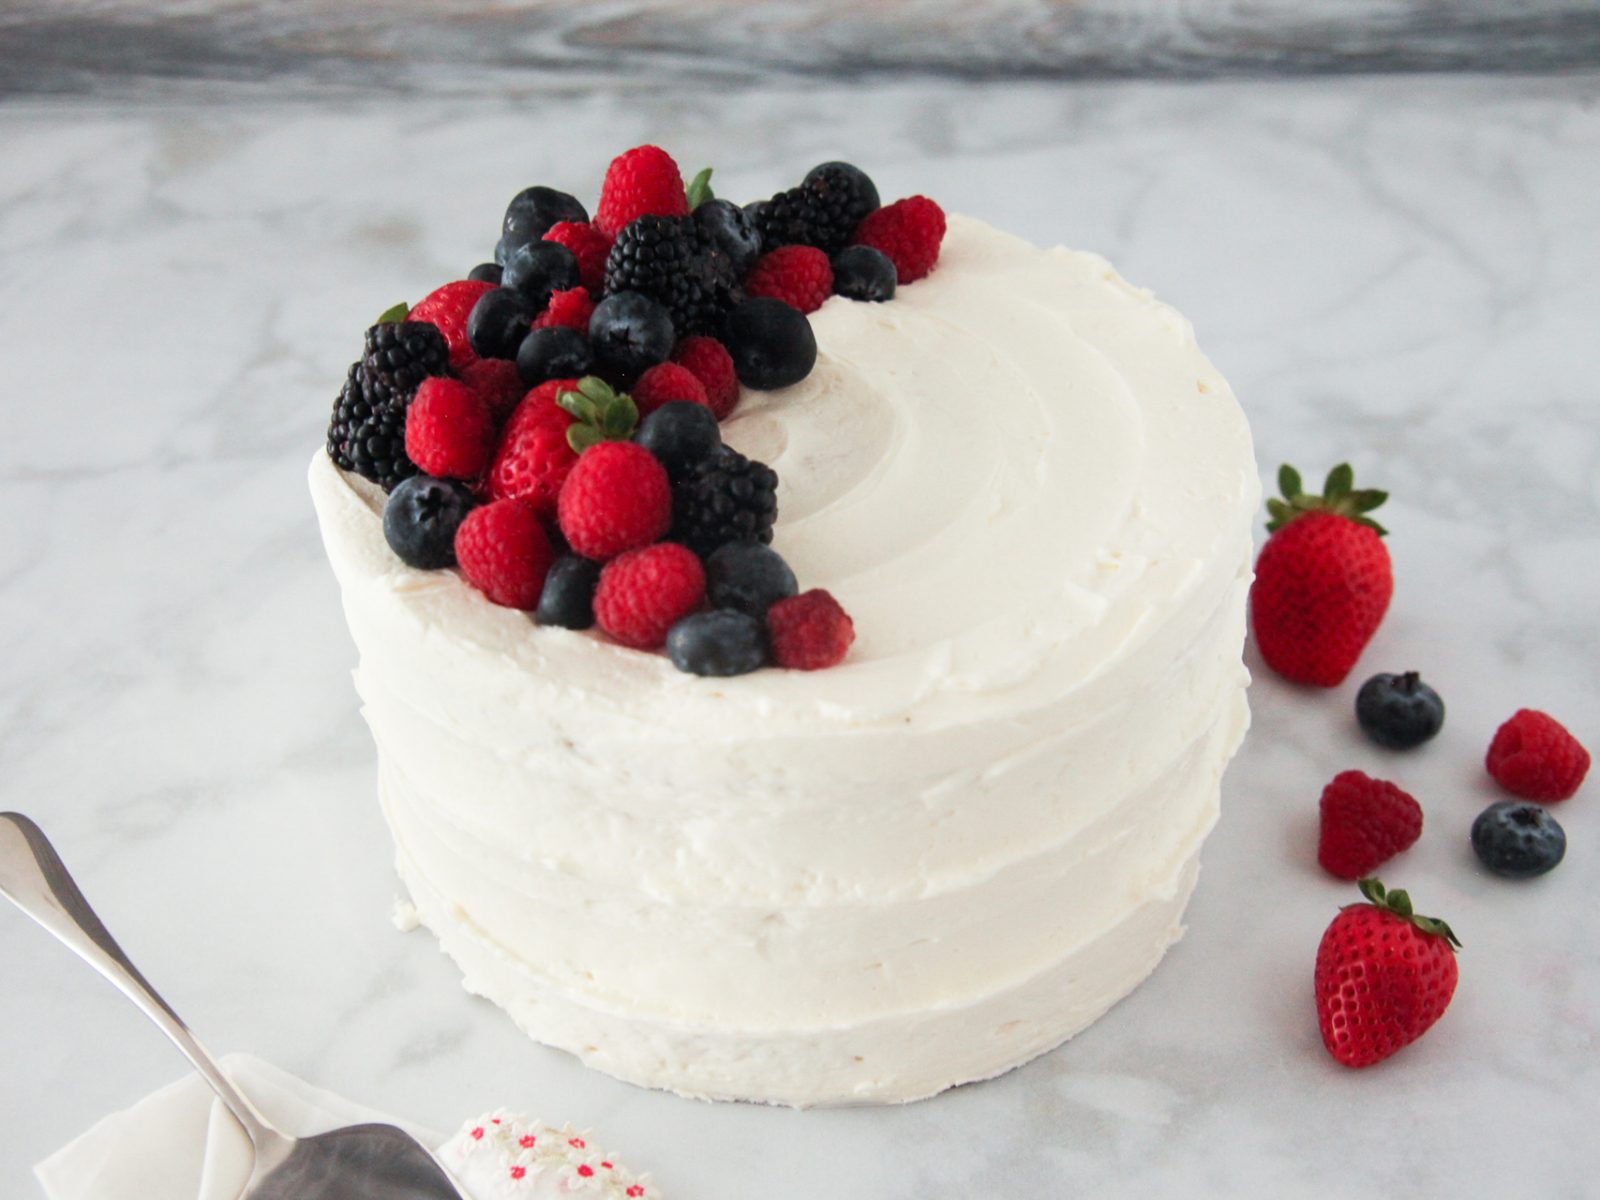 Chantilly Cake & Mascarpone Mousse Filling with Berries Recipe